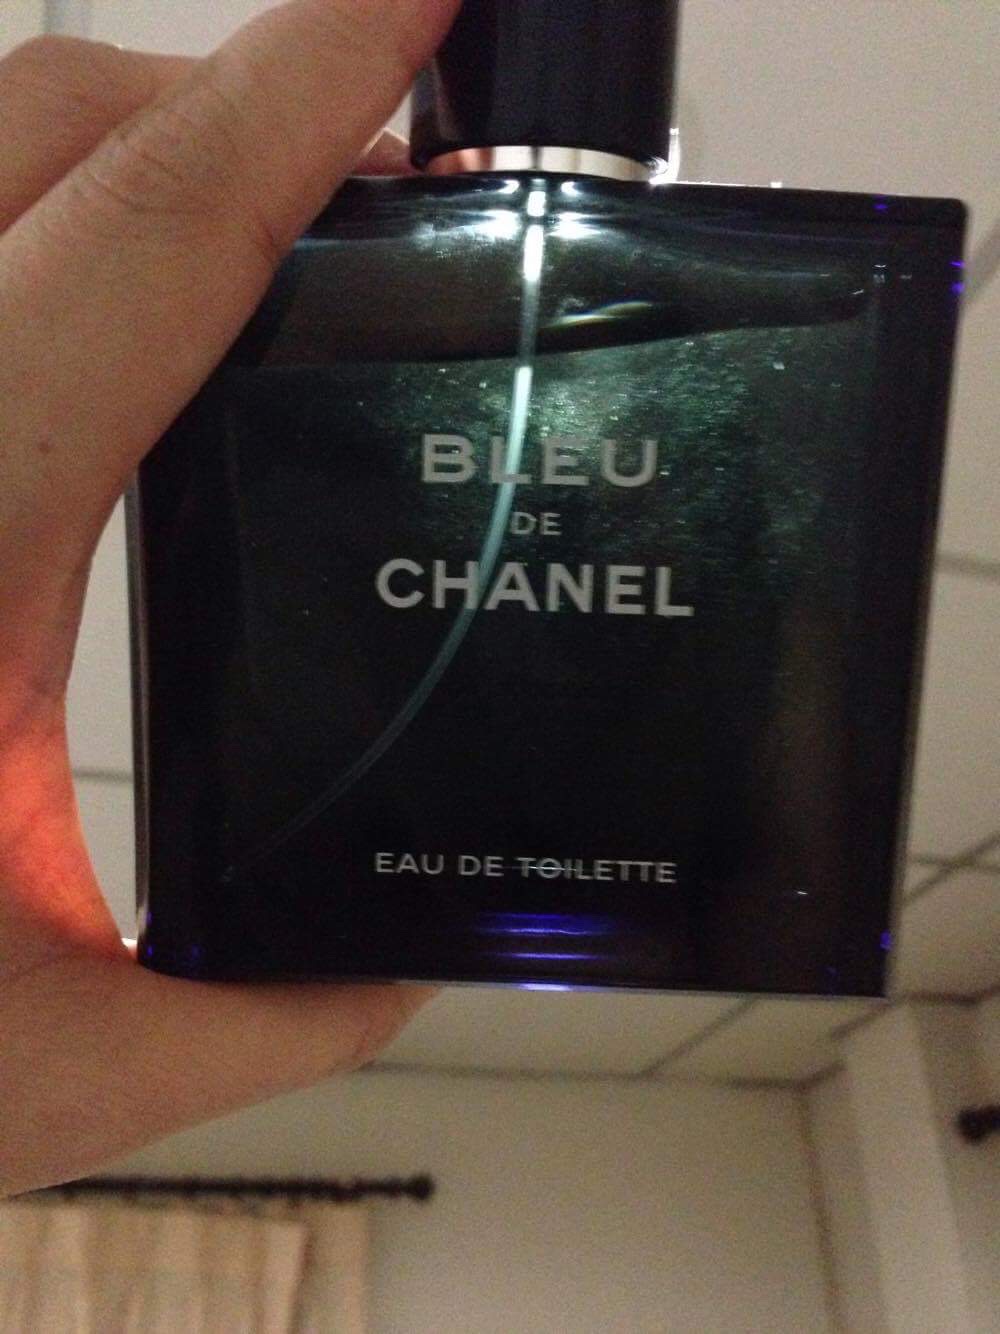 Men's Fragrances with Sexy Mass Appeal, Part 1 - Chanel Bleu De Chanel -  GirlsAskGuys